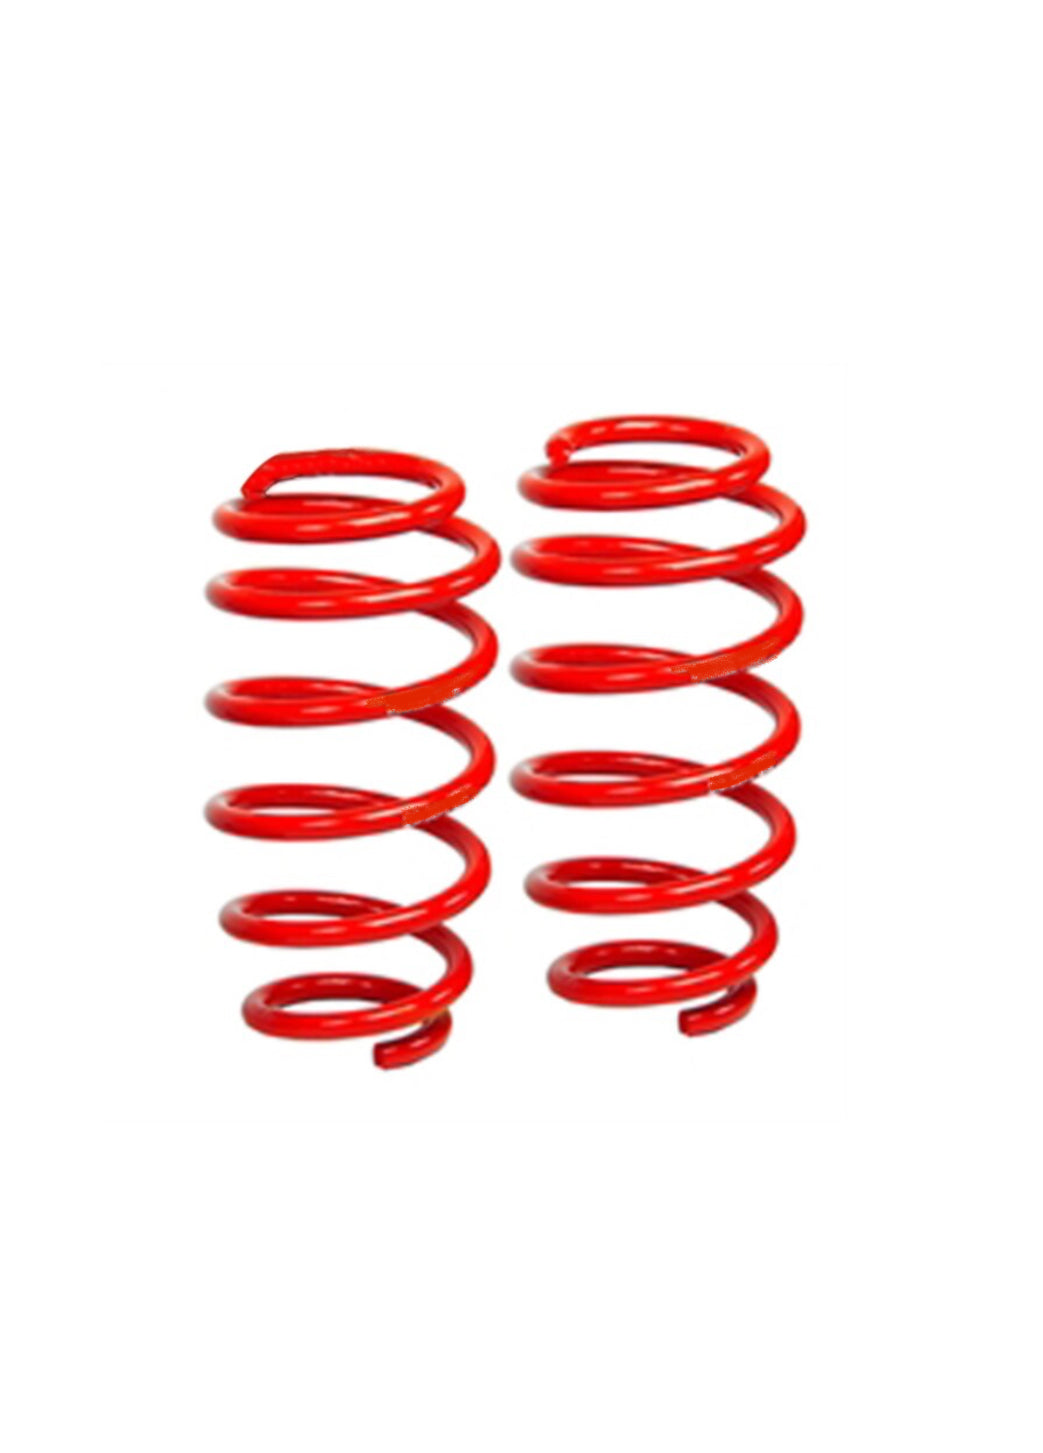 BMW F11 5 Series Touring rear coil spring conversion kit